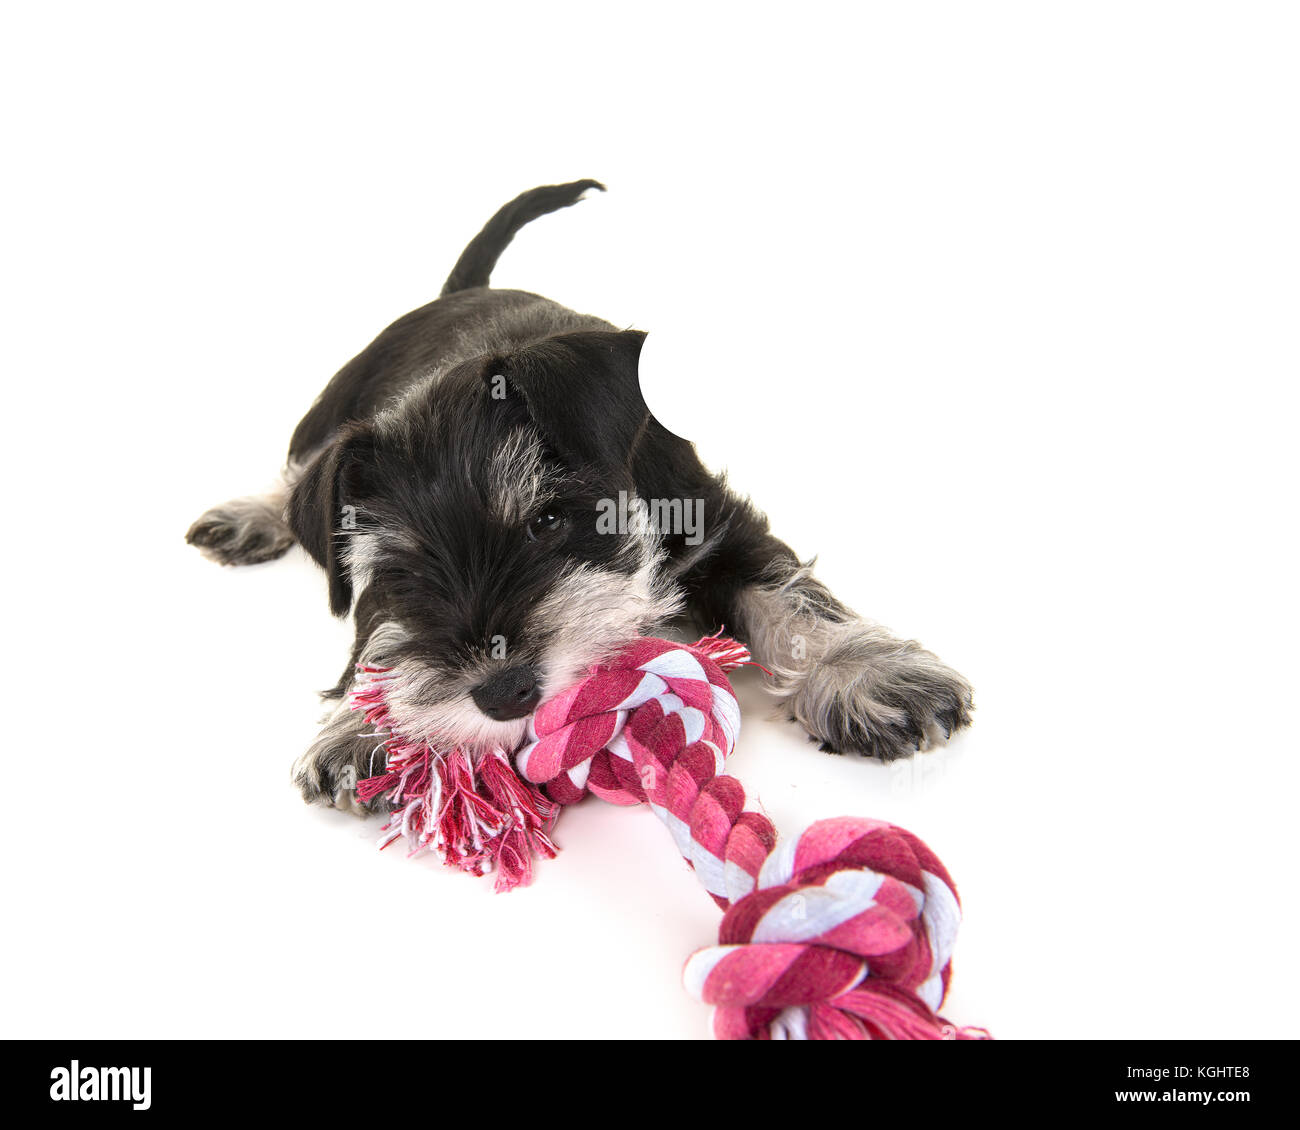 Black and grey mini schnauzer puppy lying on the floor pulling on a pink and white woven rope toy isolated on a white background Stock Photo